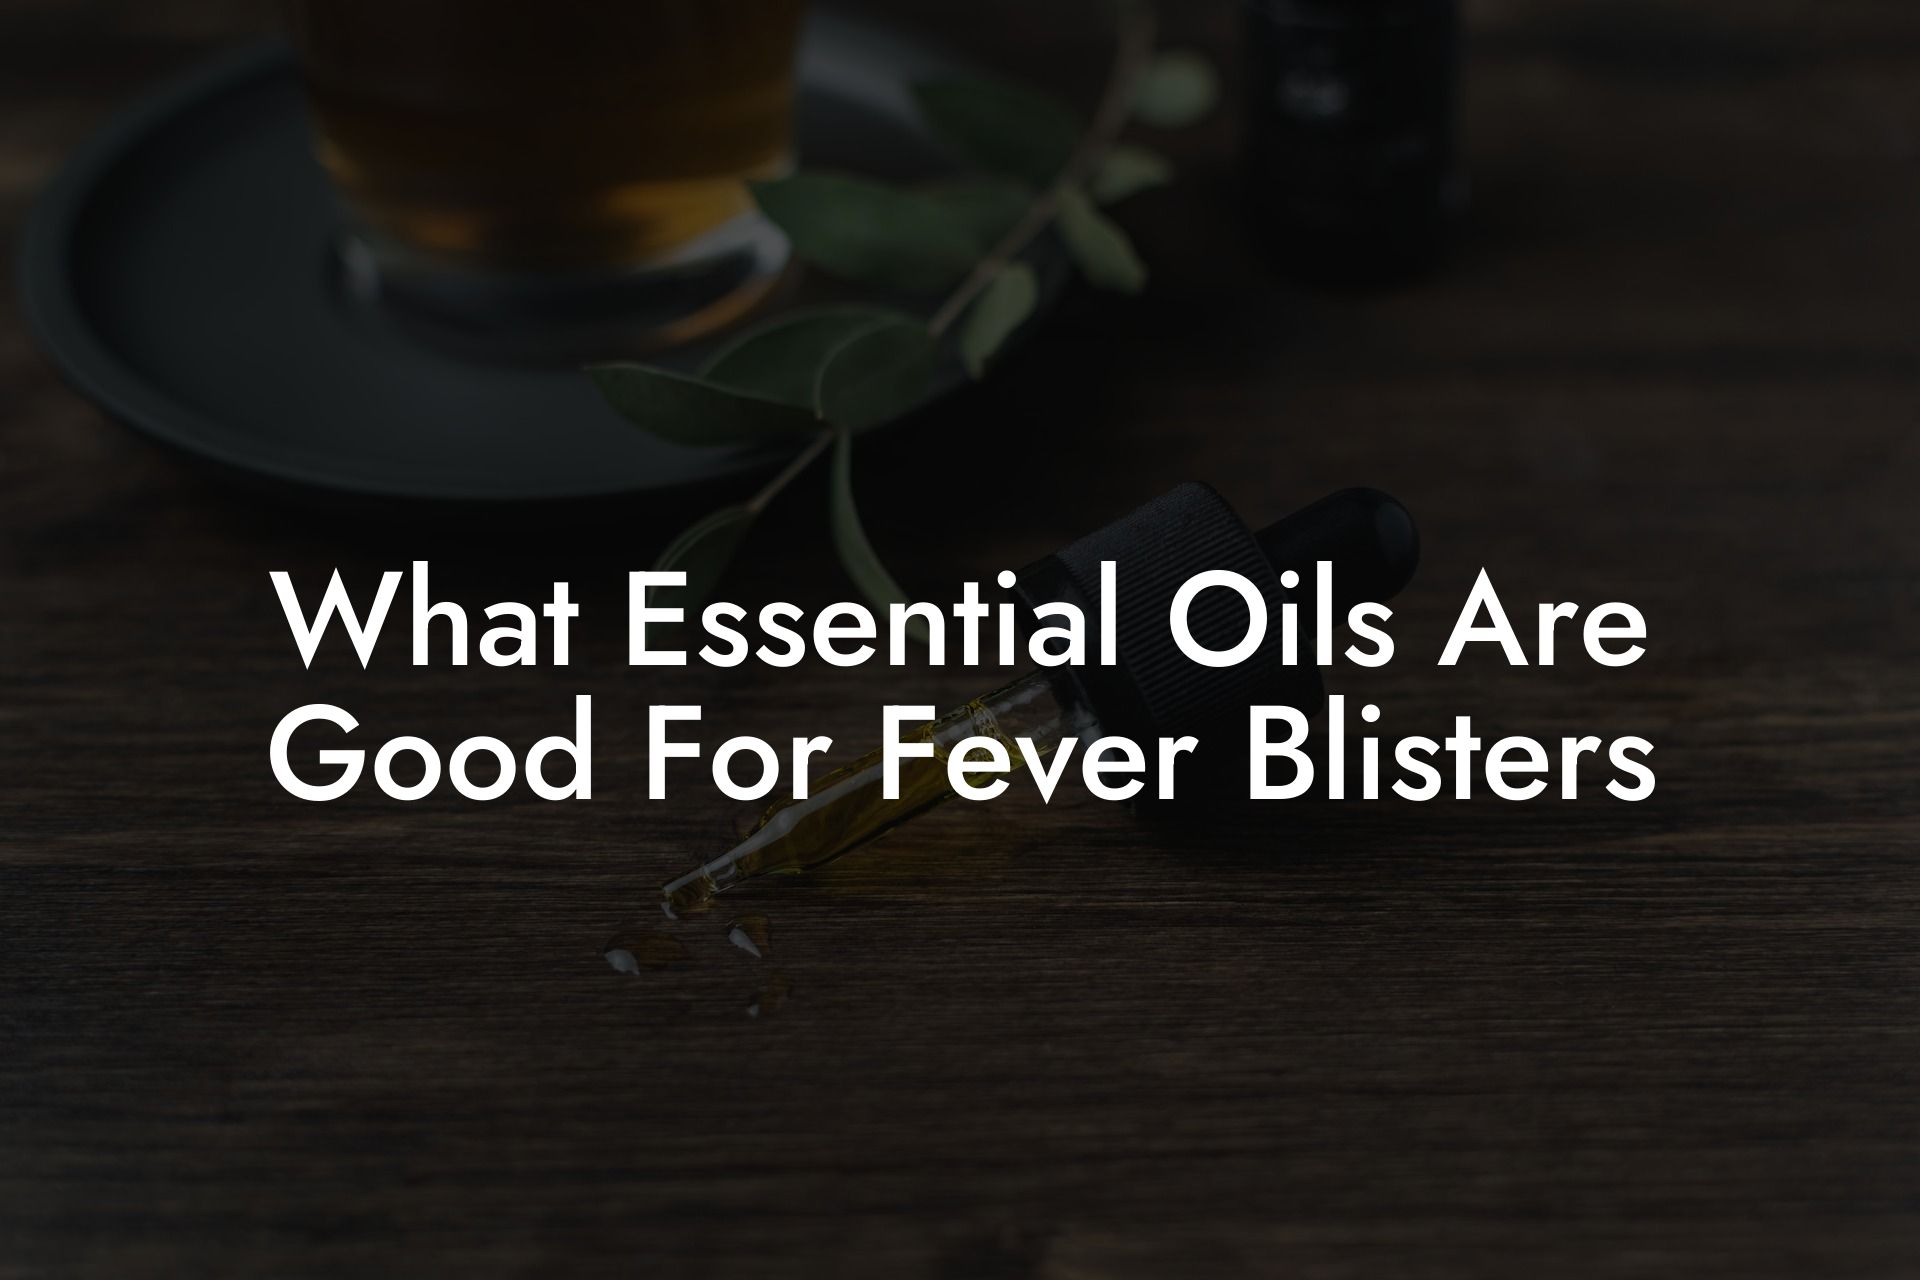 What Essential Oils Are Good For Fever Blisters